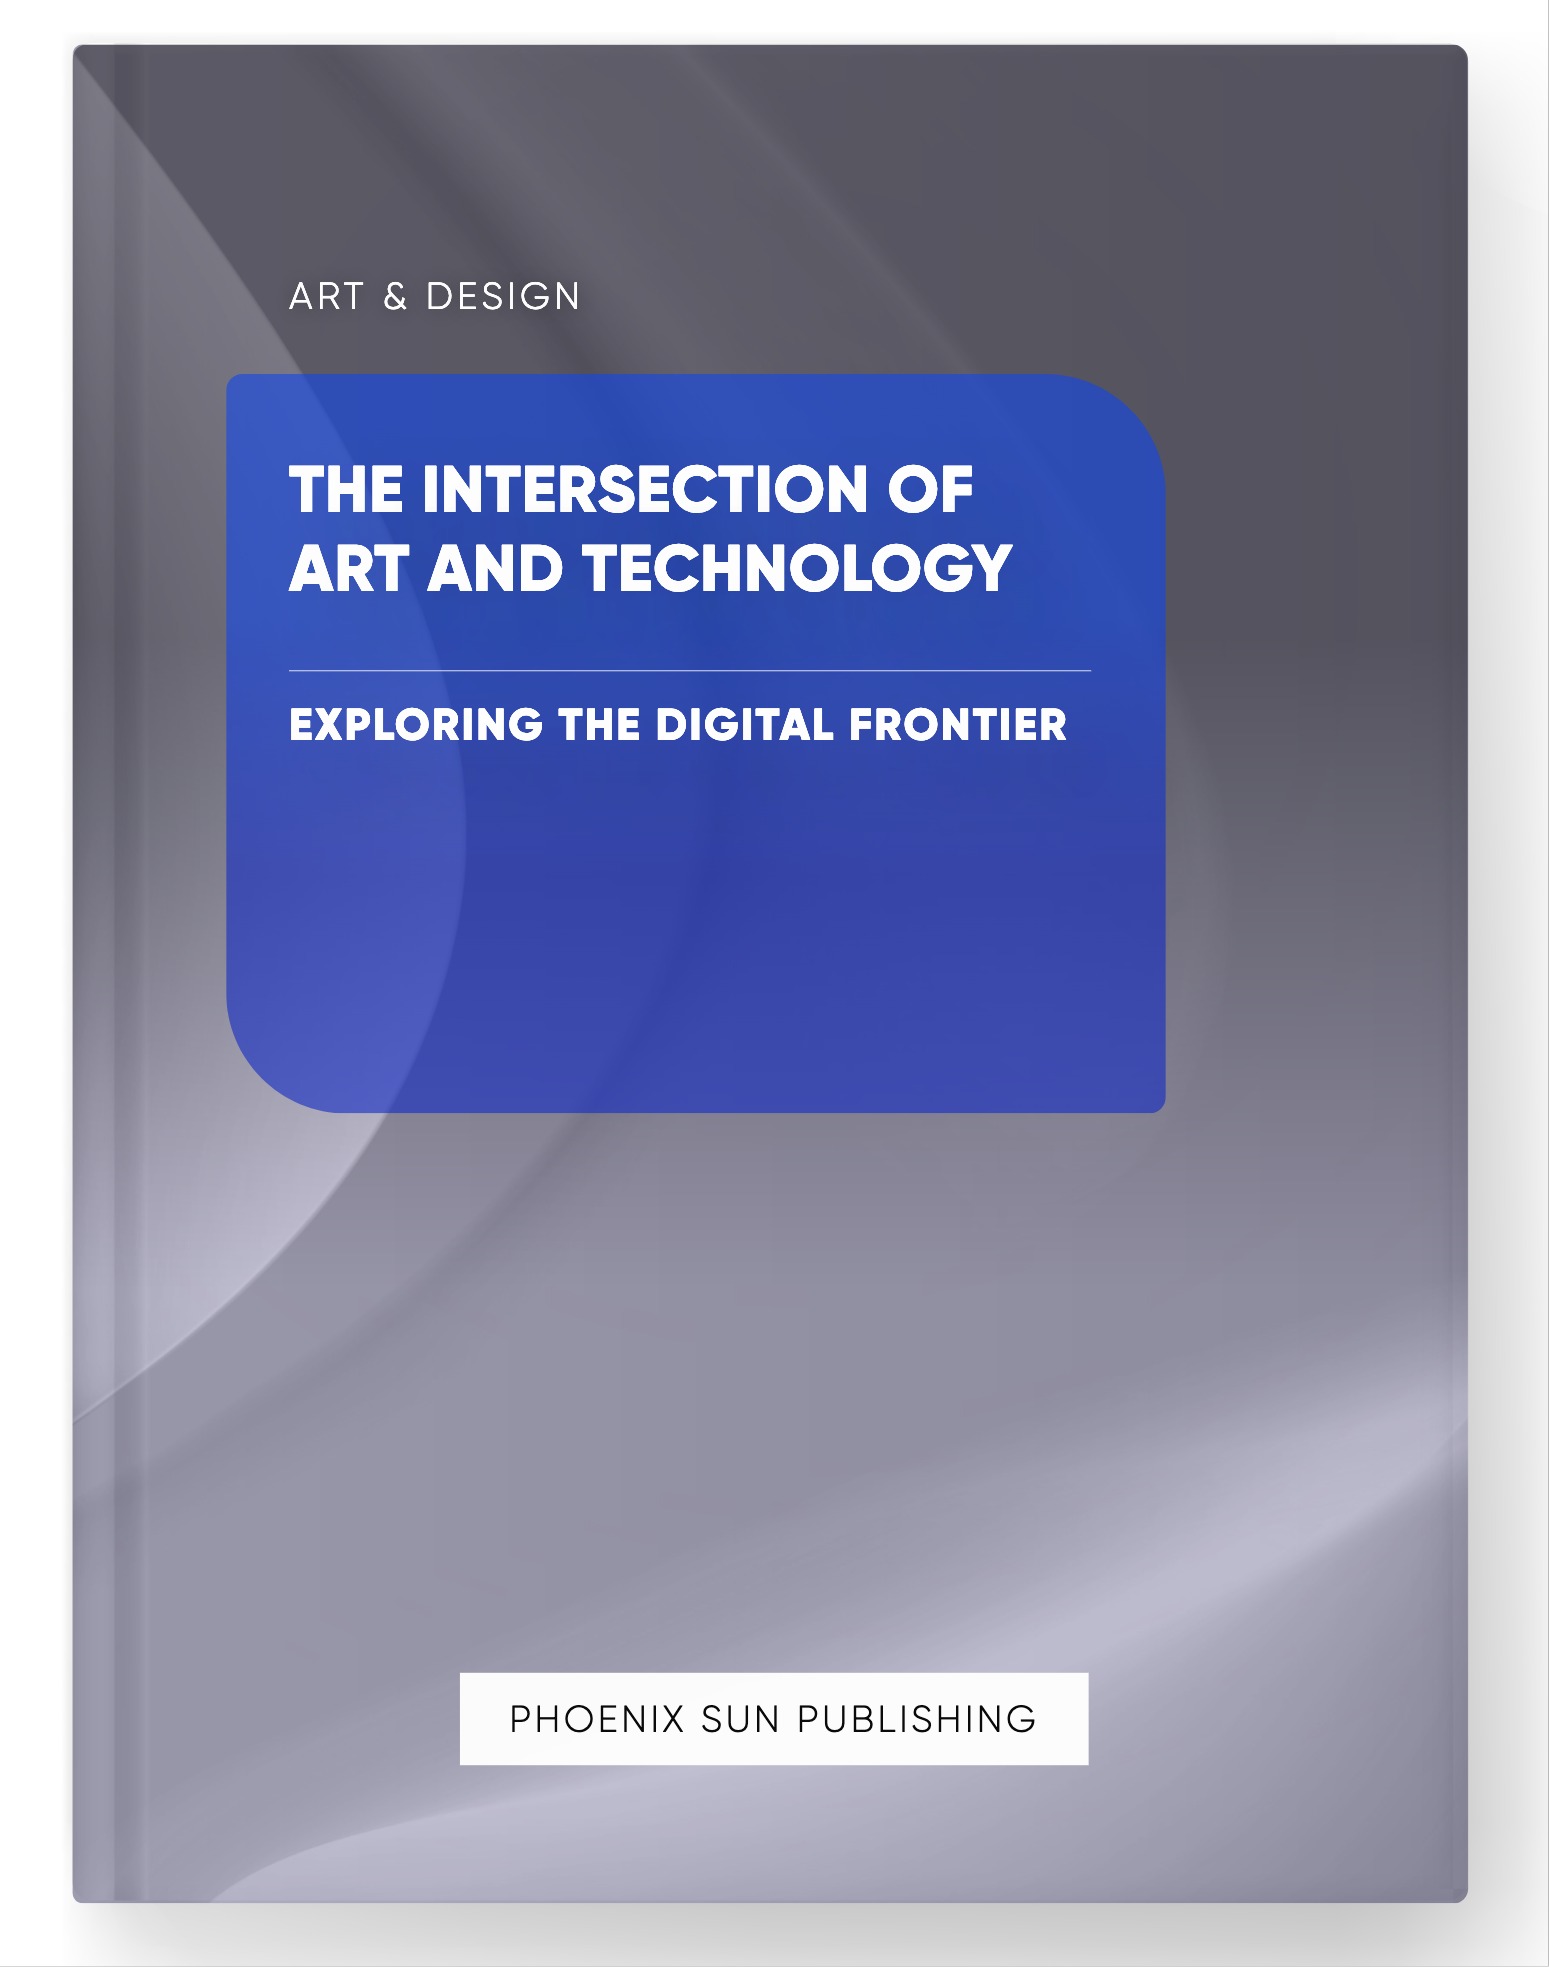 The Intersection of Art and Technology – Exploring the Digital Frontier